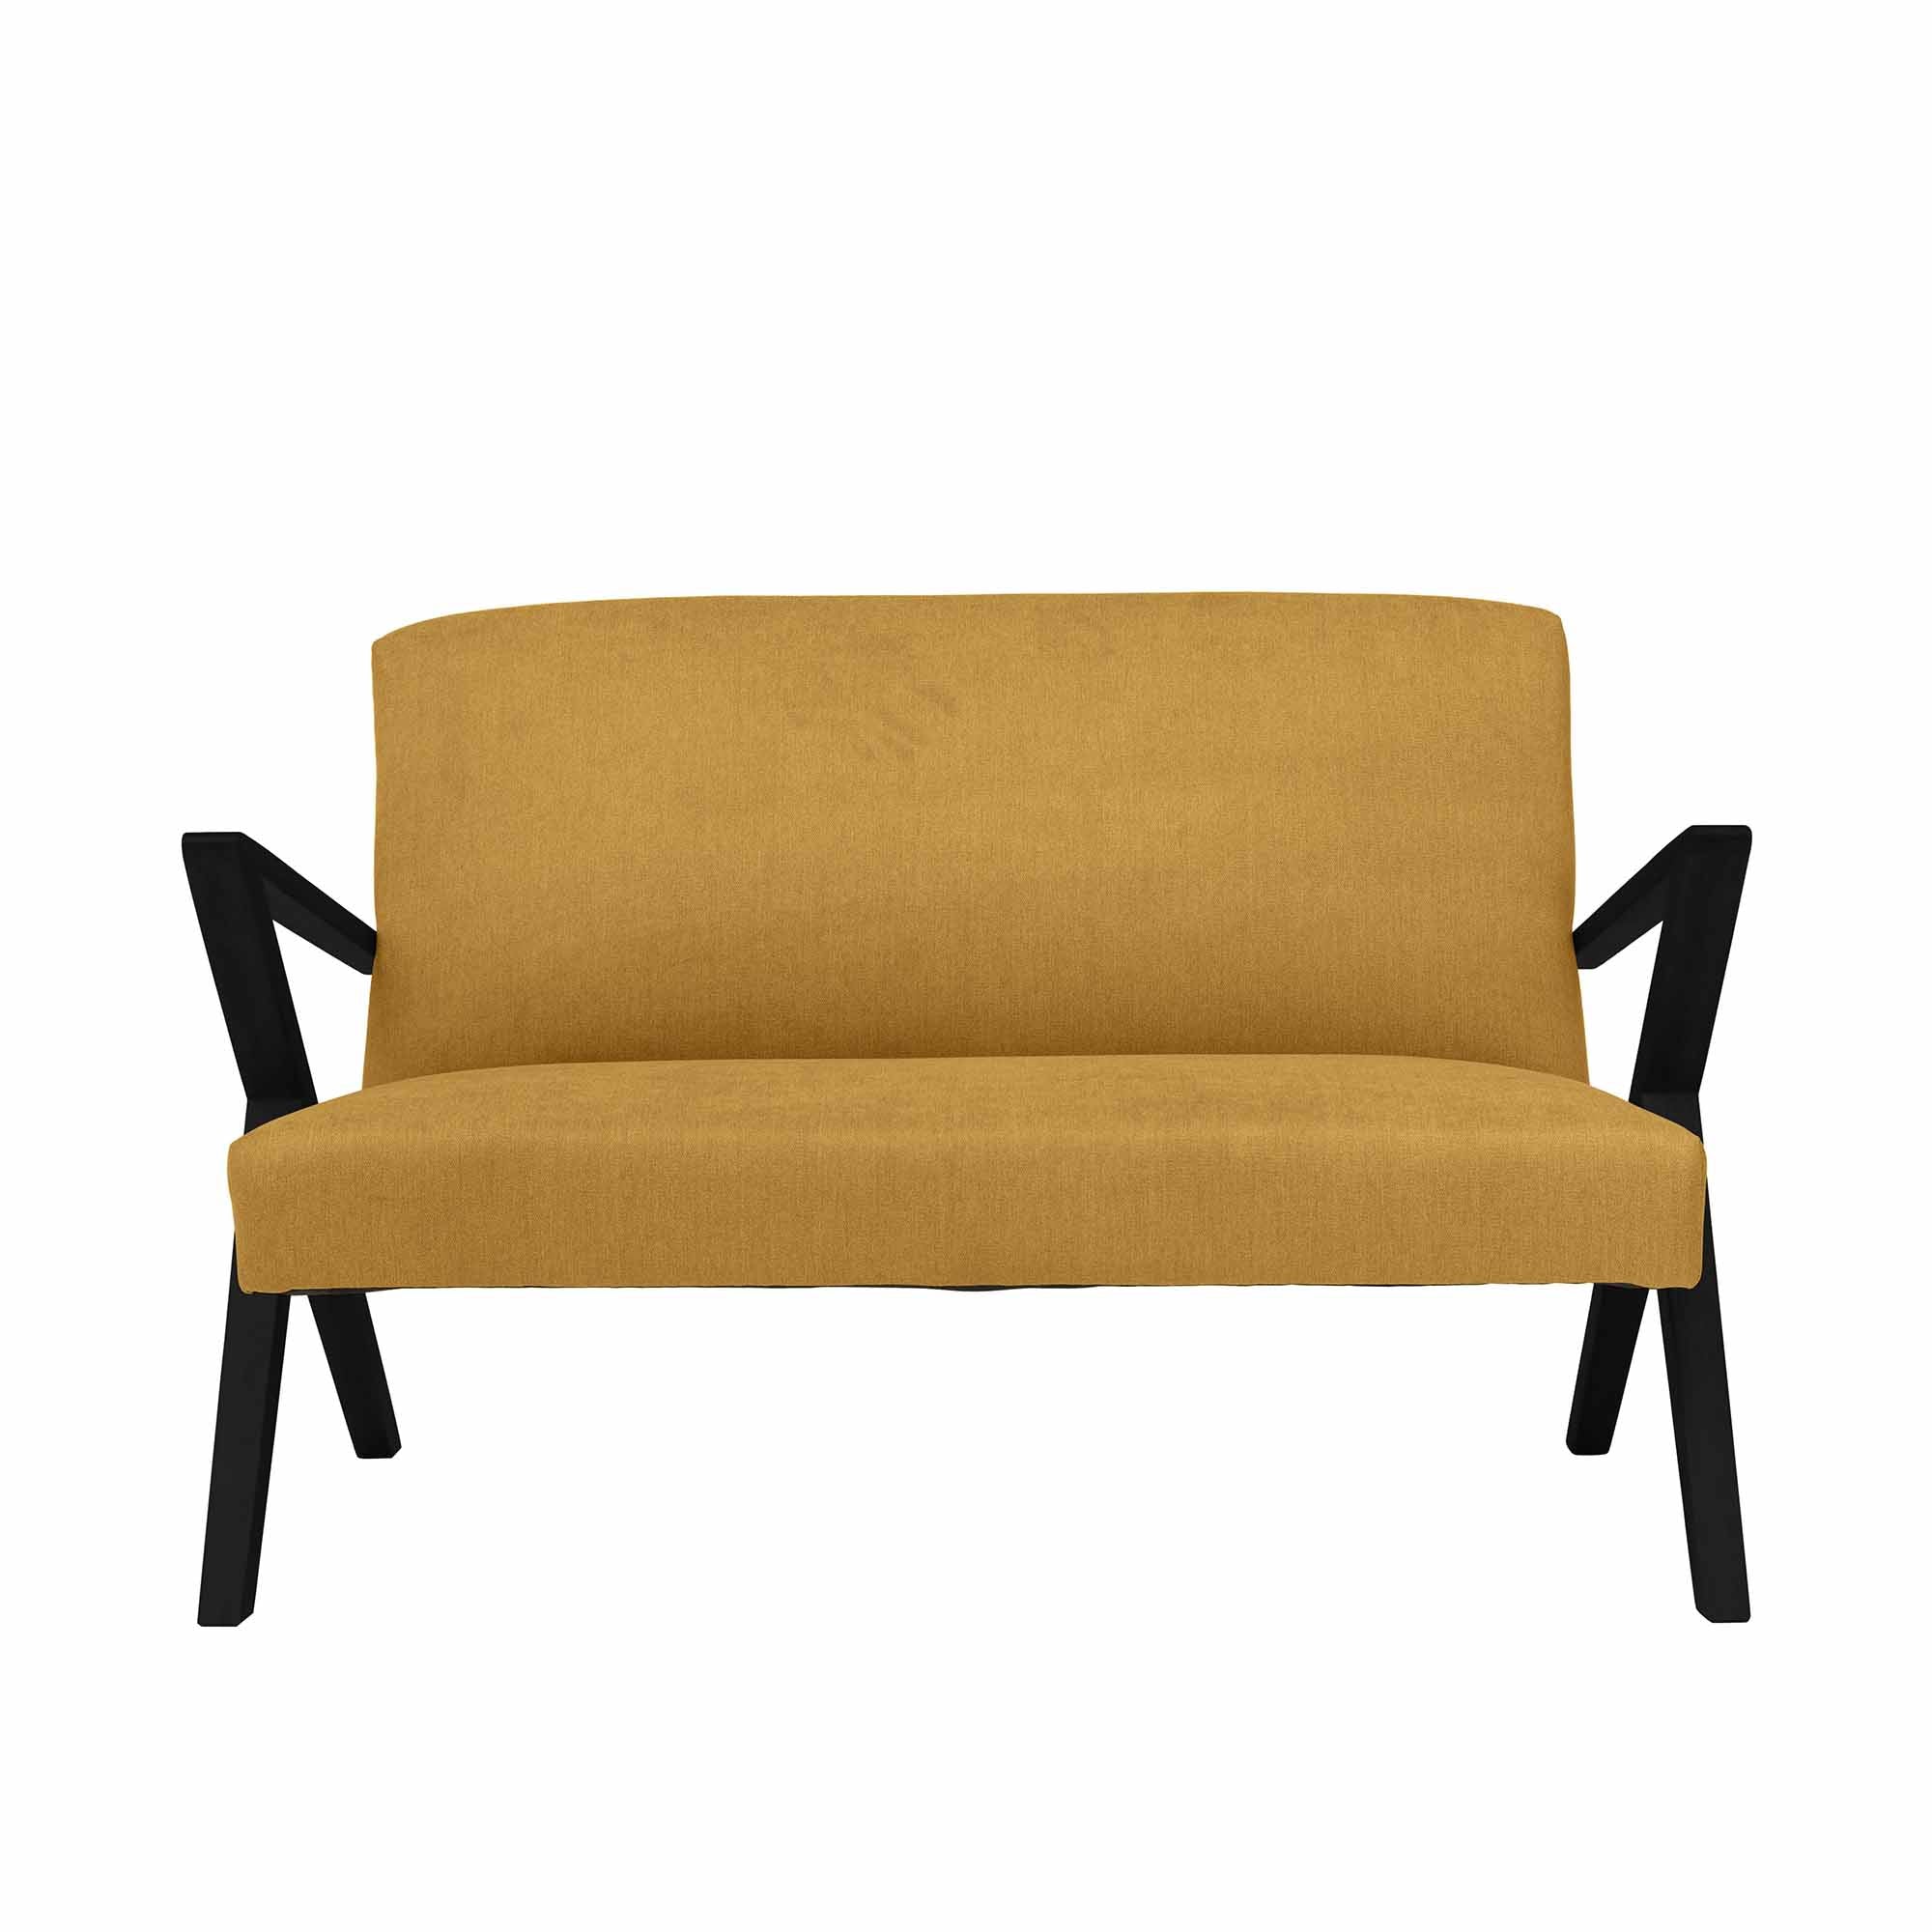 2-Seater Sofa, Beech Wood Frame, Black Lacquered yellow fabric, front view